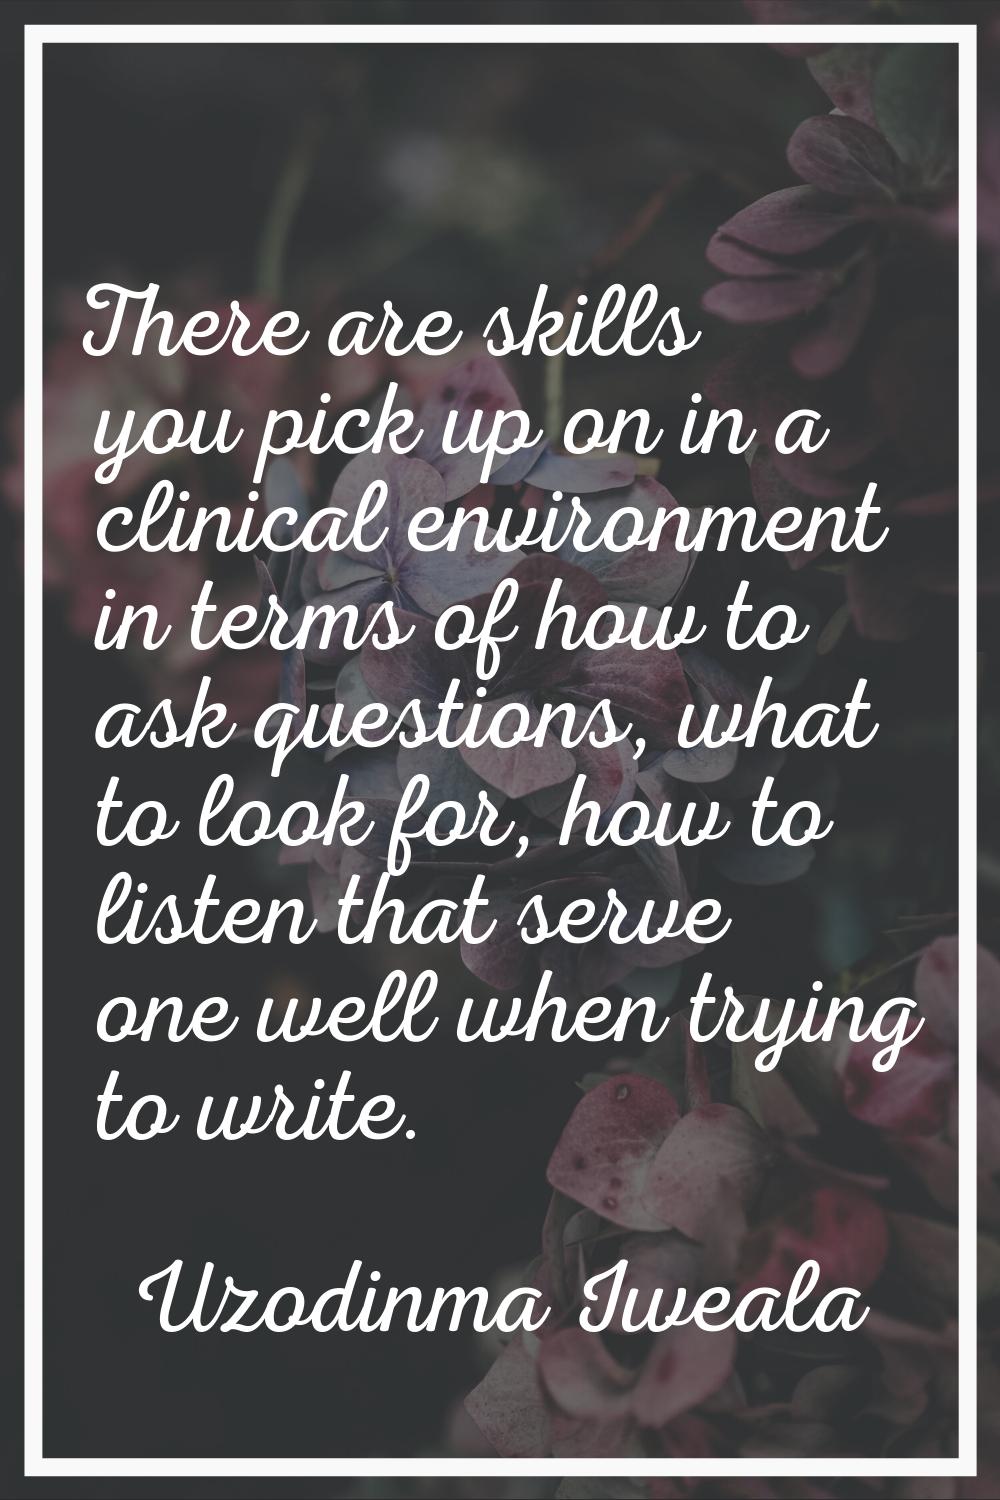 There are skills you pick up on in a clinical environment in terms of how to ask questions, what to